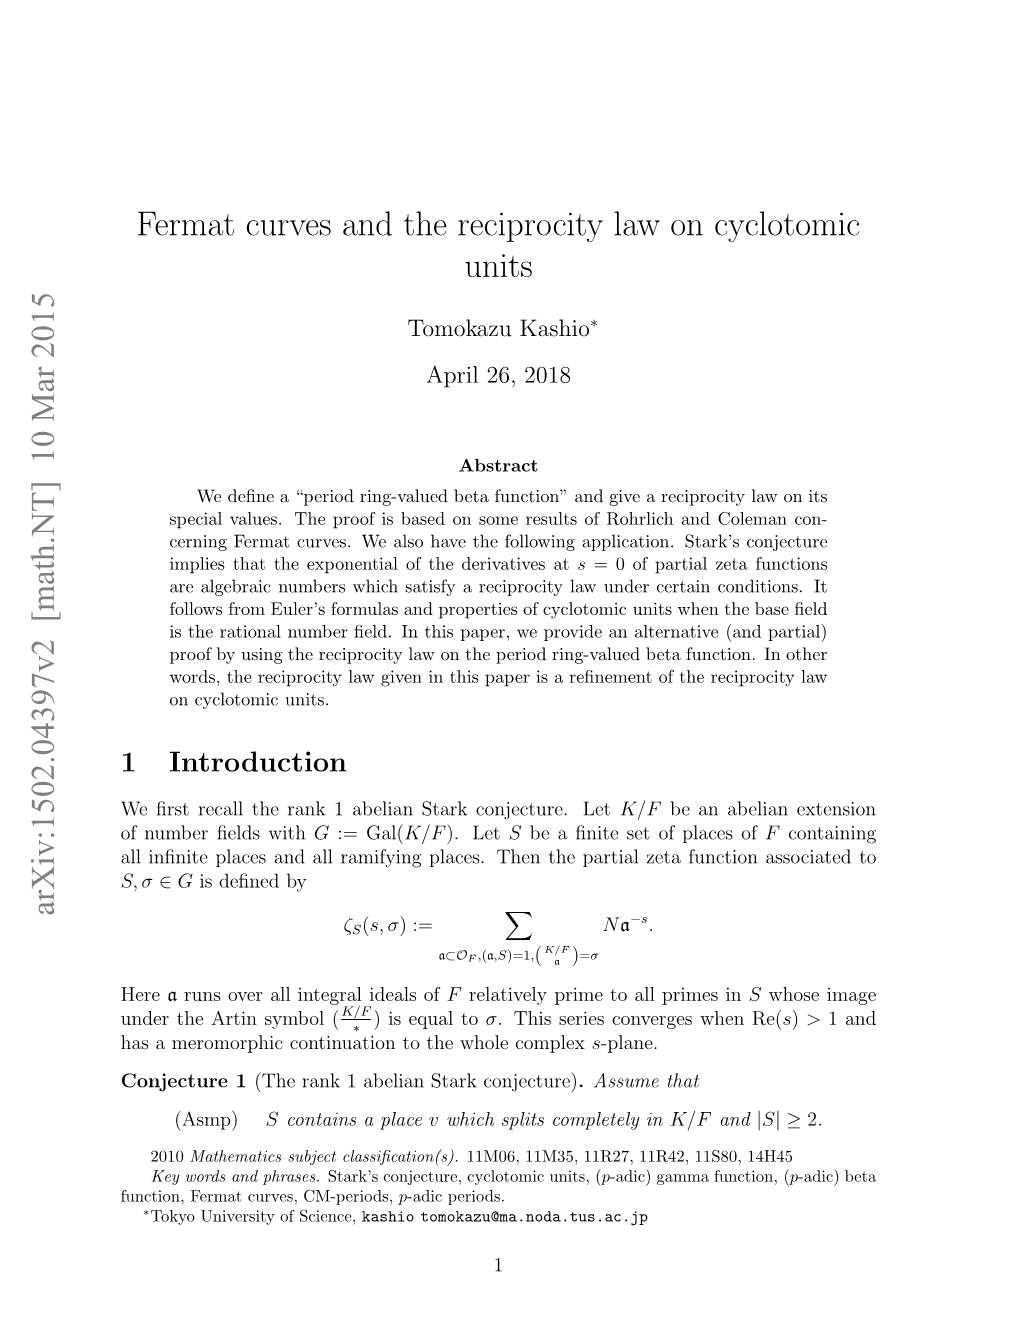 Fermat Curves and the Reciprocity Law on Cyclotomic Units